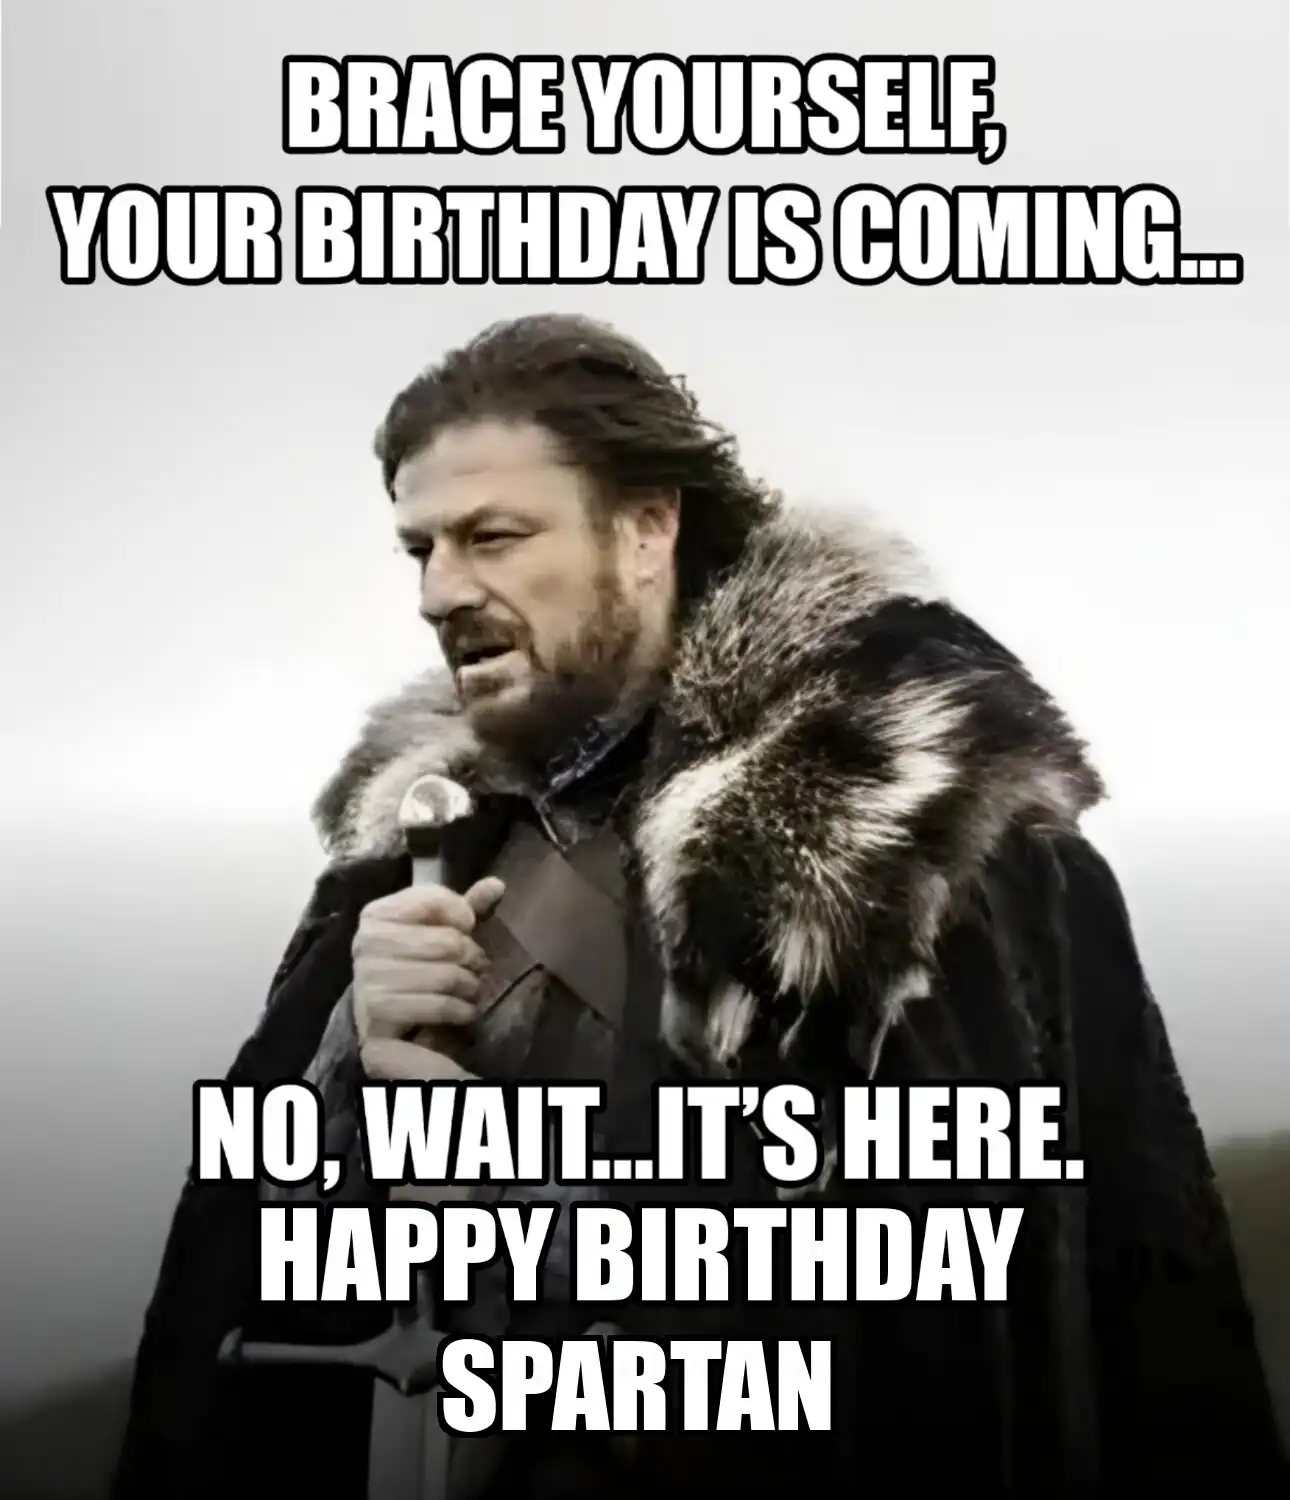 Happy Birthday Spartan Brace Yourself Your Birthday Is Coming Meme